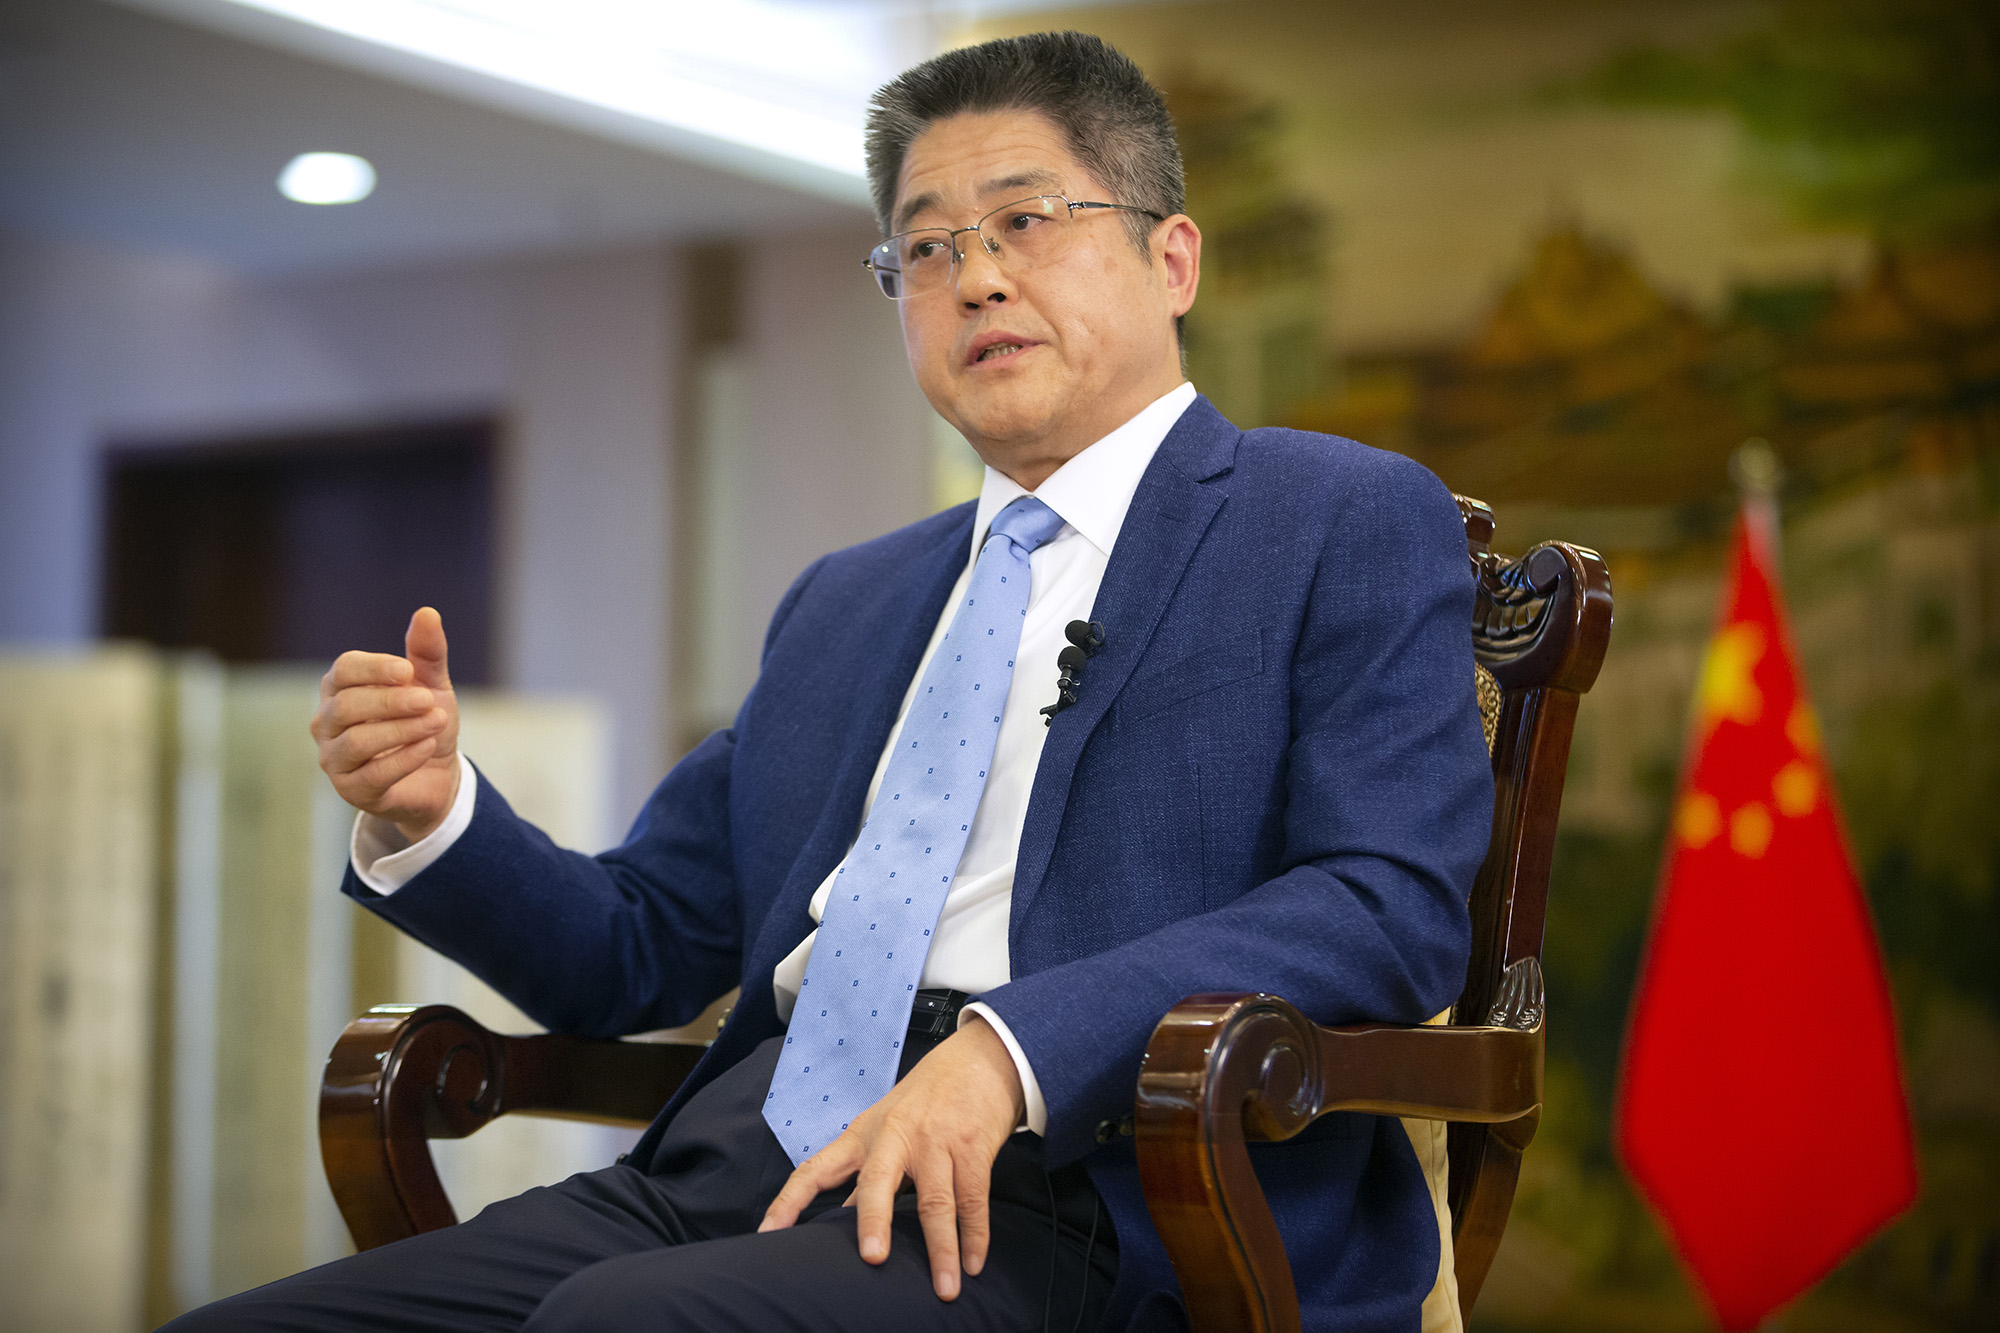 Chinese Vice Minister of Foreign Affairs Le Yucheng speaks during an interview with the Associated Press at the Ministry of Foreign Affairs in Beijing, China, on April 16 2021.